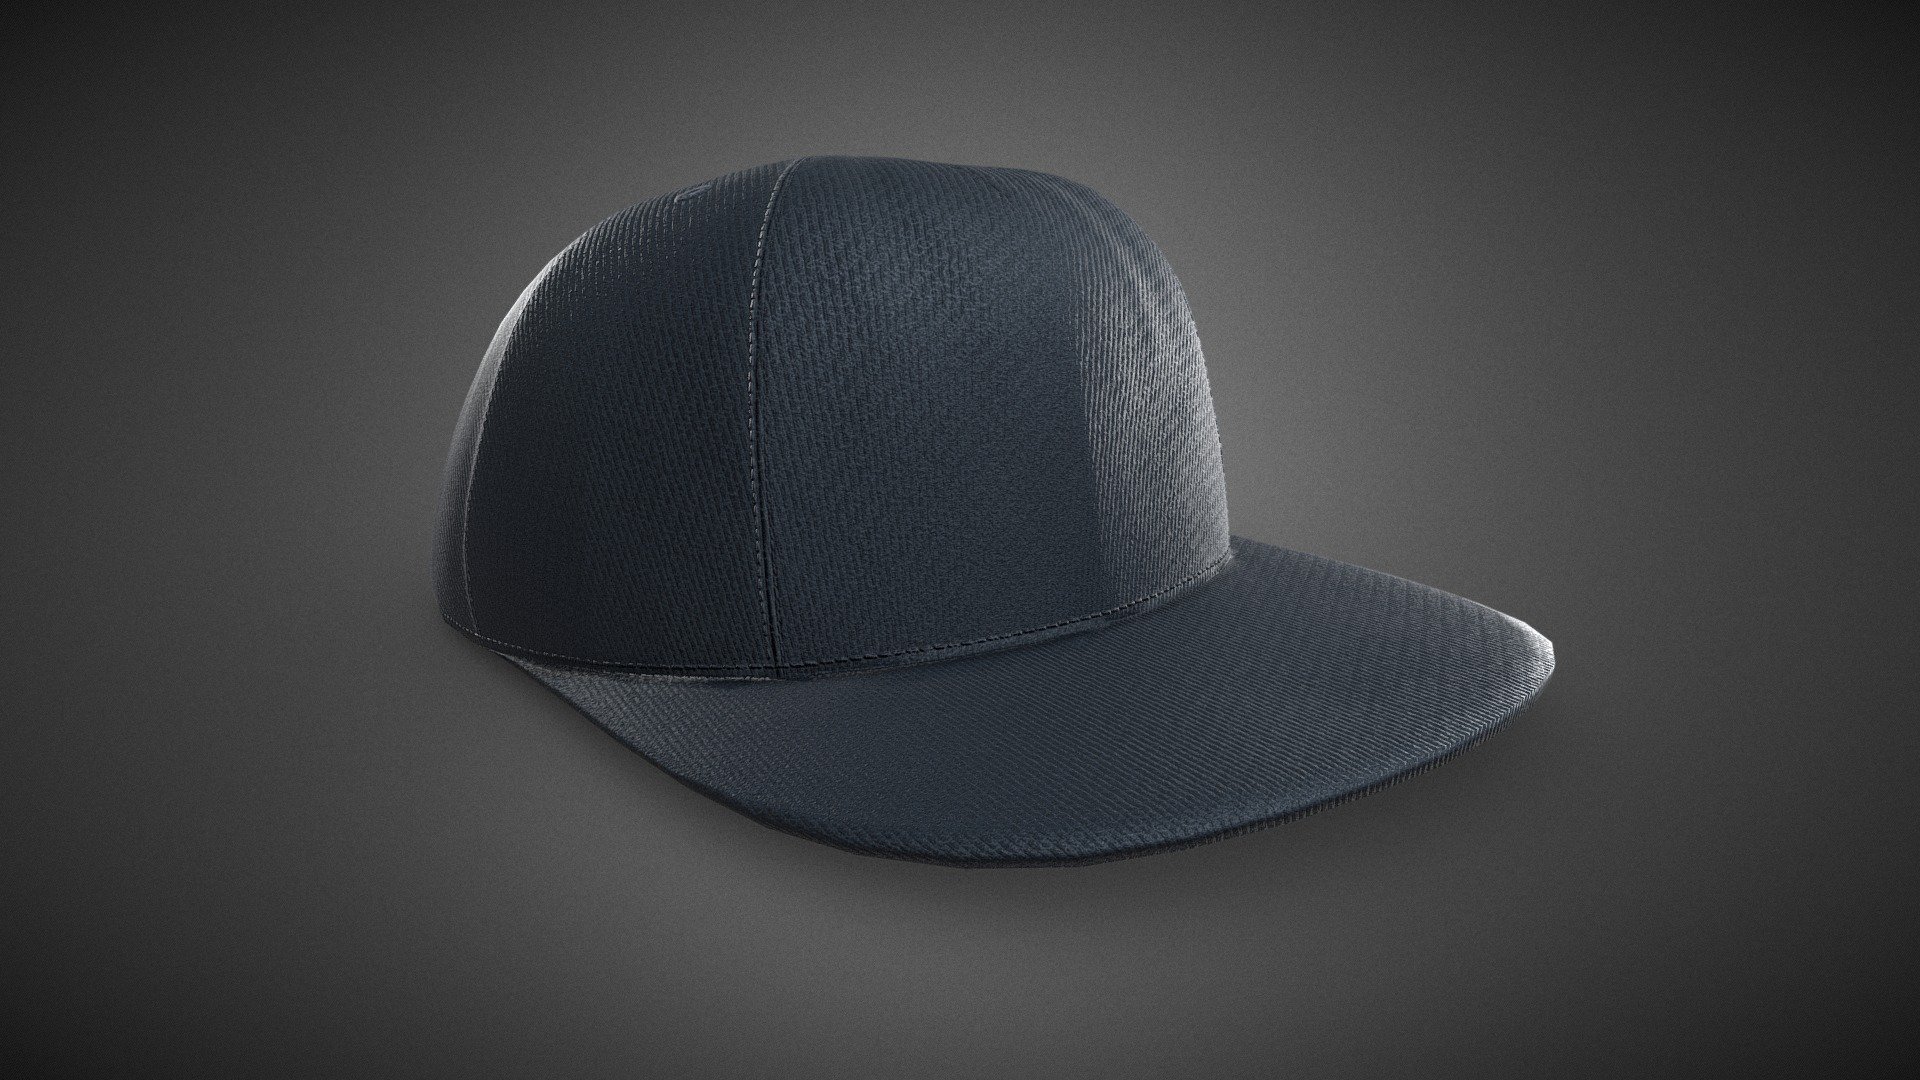 CG StudioX Present :
Snapback lowpoly/PBR


This is Snapback Comes with Specular and Metalness PBR.
The photo been rendered using Marmoset Toolbag 4 (real time game engine )

Features :

Comes with Specular and Metalness PBR 4K texture .
Good topology.
Low polygon geometry.
The Model is prefect for game for both Specular workflow as in Unity and Metalness as in Unreal engine .
The model also rendered using Marmoset Toolbag 4 with both Specular and Metalness PBR and also included in the product with the full texture.
The texture can be easily adjustable .

Texture :

One set of UV [Albedo -Normal-Metalness -Roughness-Gloss-Specular-Ao] (4096*4096)

Files :
Marmoset Toolbag 4 ,Maya,,FBX,OBj with all the textures.


Contact me for if you have any questions.
 - Snapback - Buy Royalty Free 3D model by CG StudioX (@CG_StudioX) 3d model